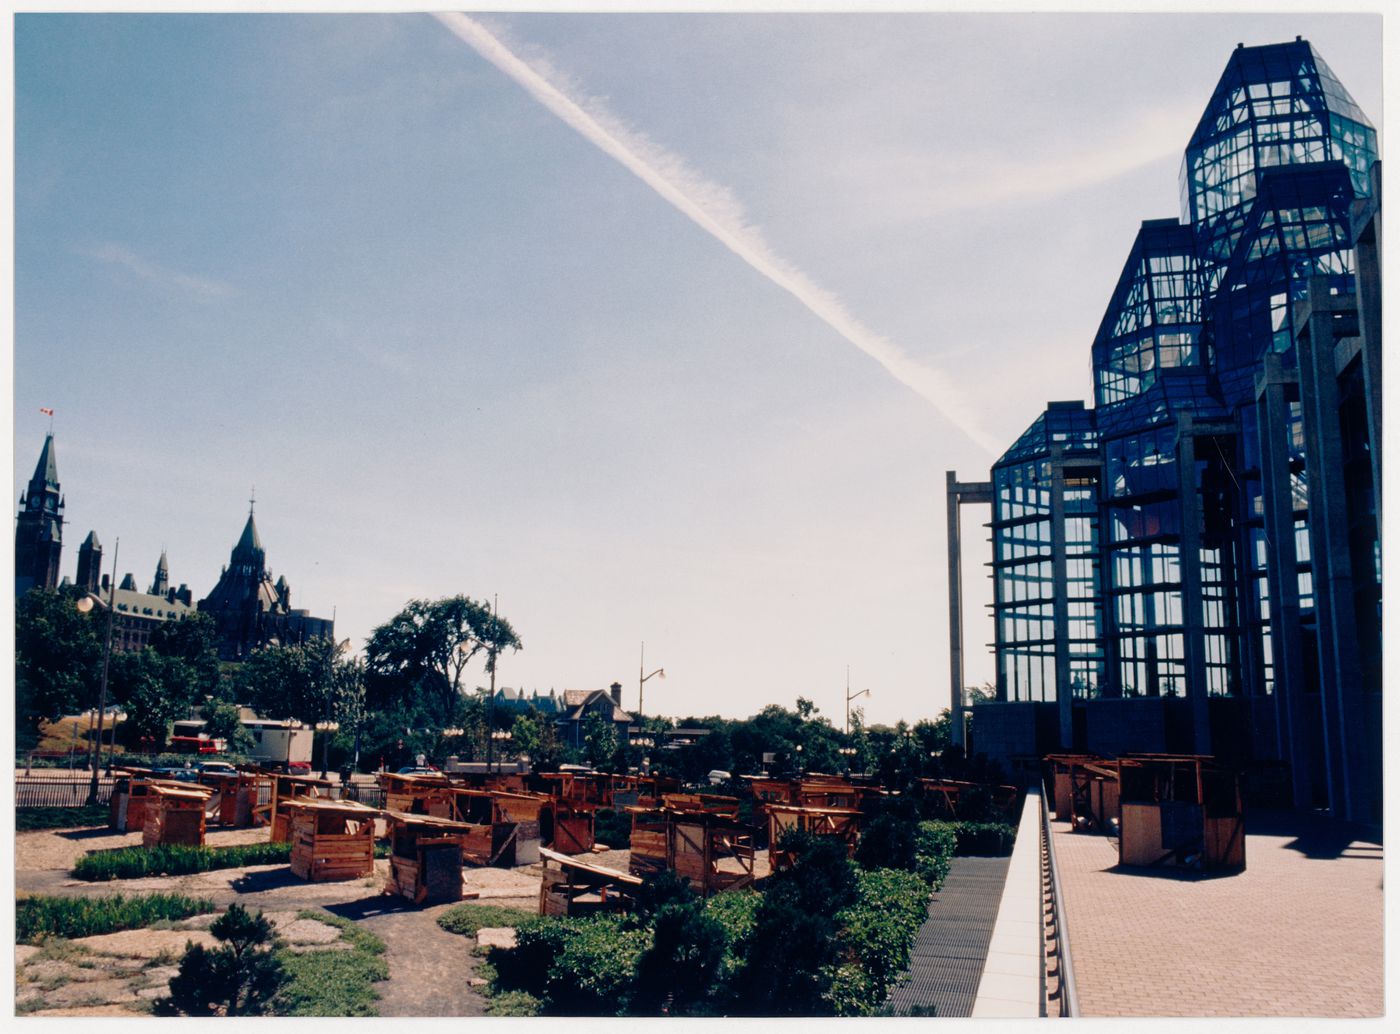 View of the installation "Favela in Ottawa", comprising wooden shack-like structures in the Taiga Garden of the National Gallery of Canada, showing the National Gallery and the Parliament Buildings, Ottawa, Ontario